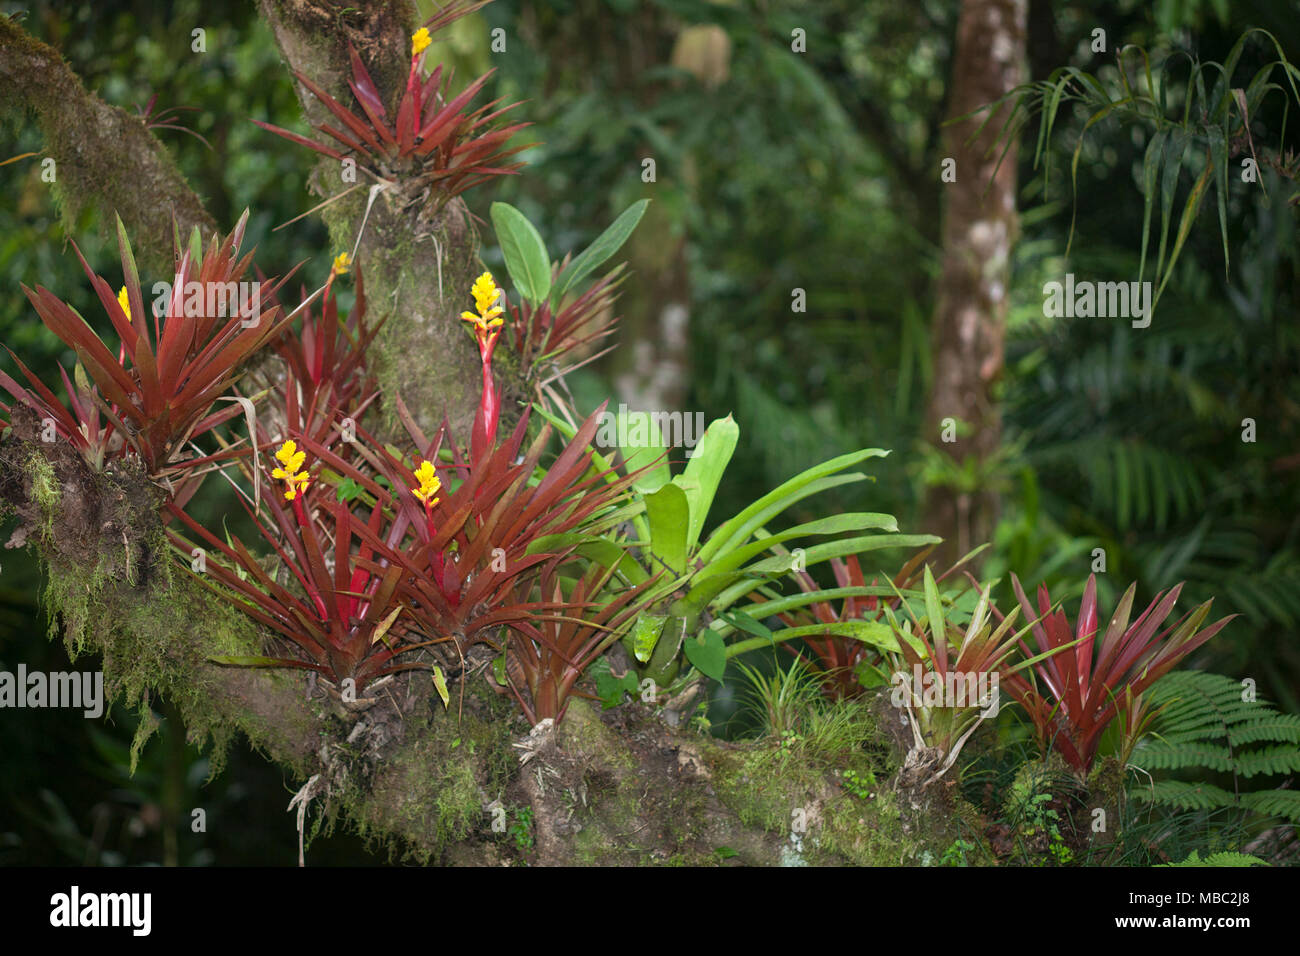 Bromeliads in flower on a tree branch, Wilson Botanical Gardens at Las Cruces Biological Station in Puntarenas province, Costa Rica Stock Photo